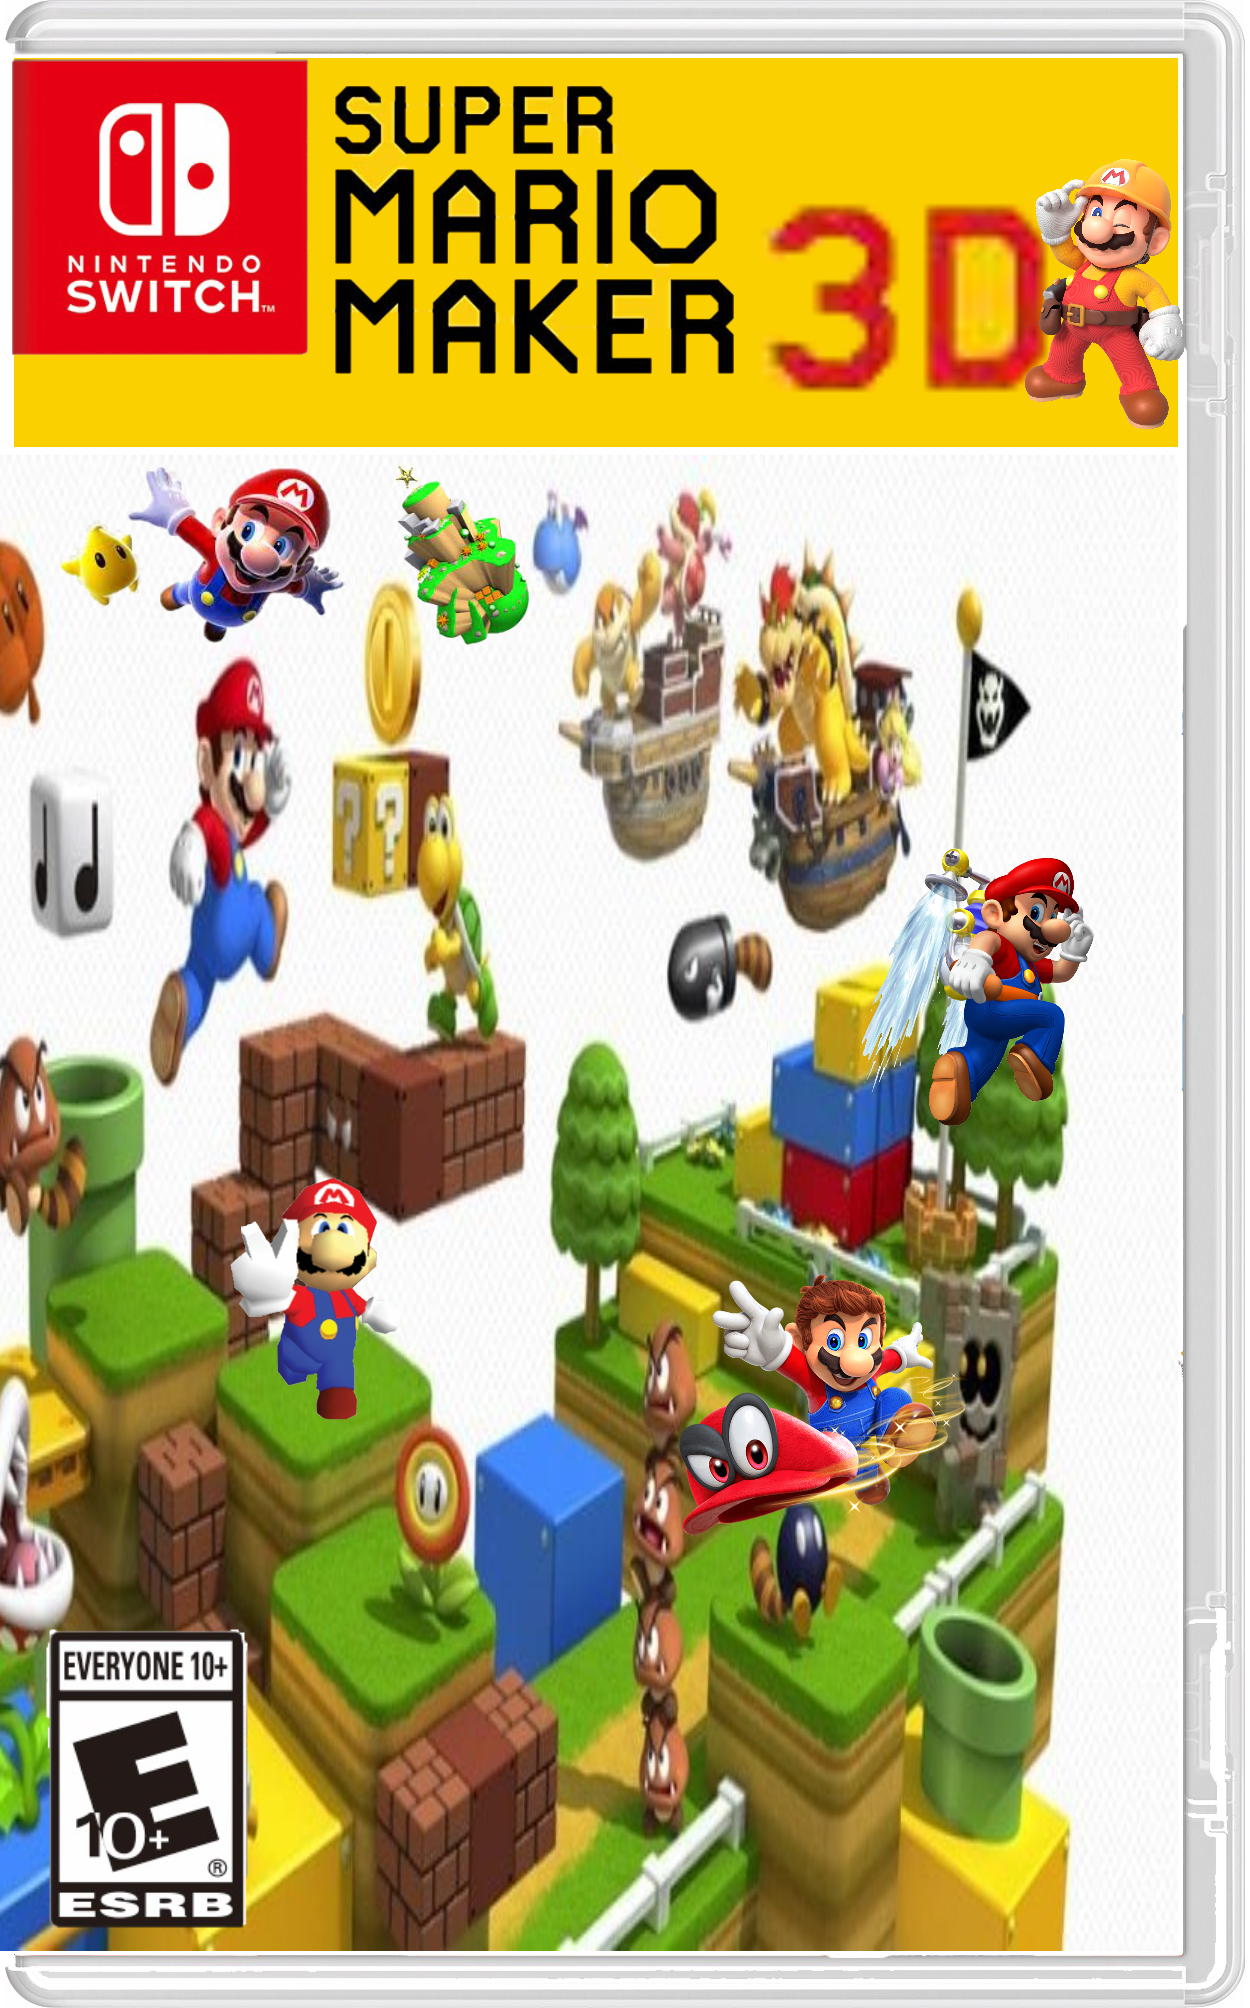 Super Mario 64 Gallery Set ALL 10 Paintings From the Game canvas Prints 